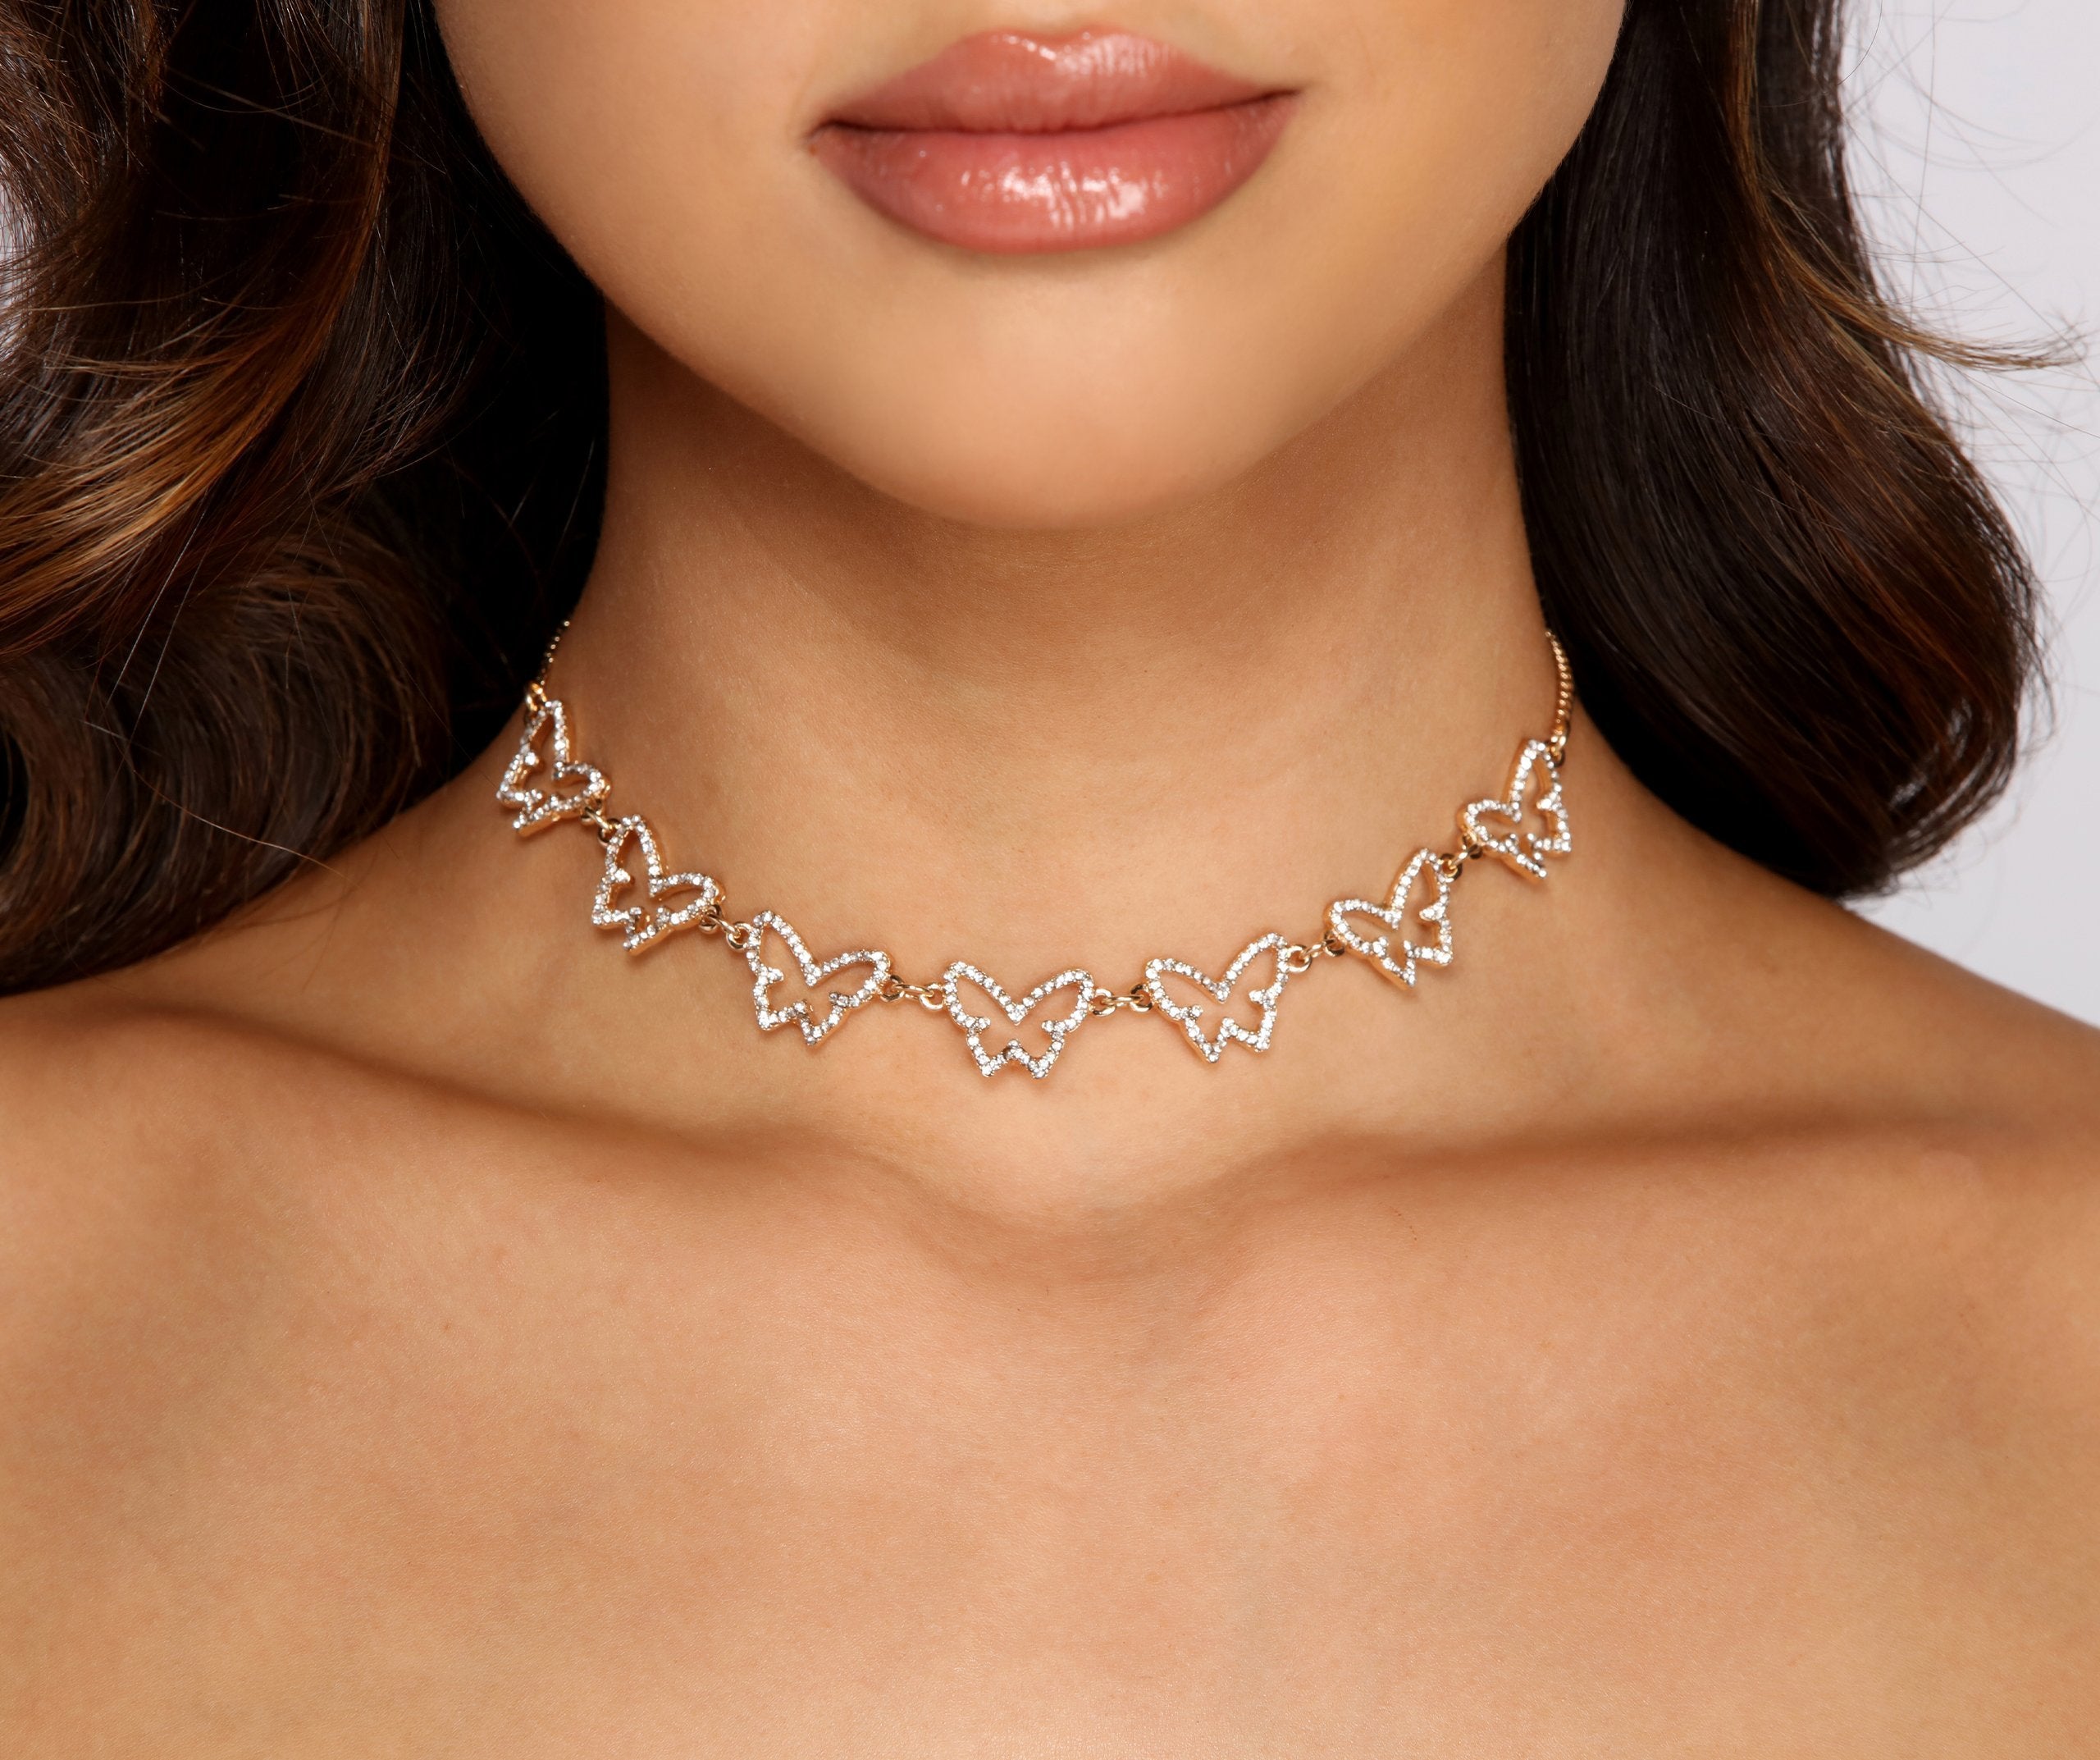 Dainty Details Rhinestone Choker Necklace - Lady Occasions